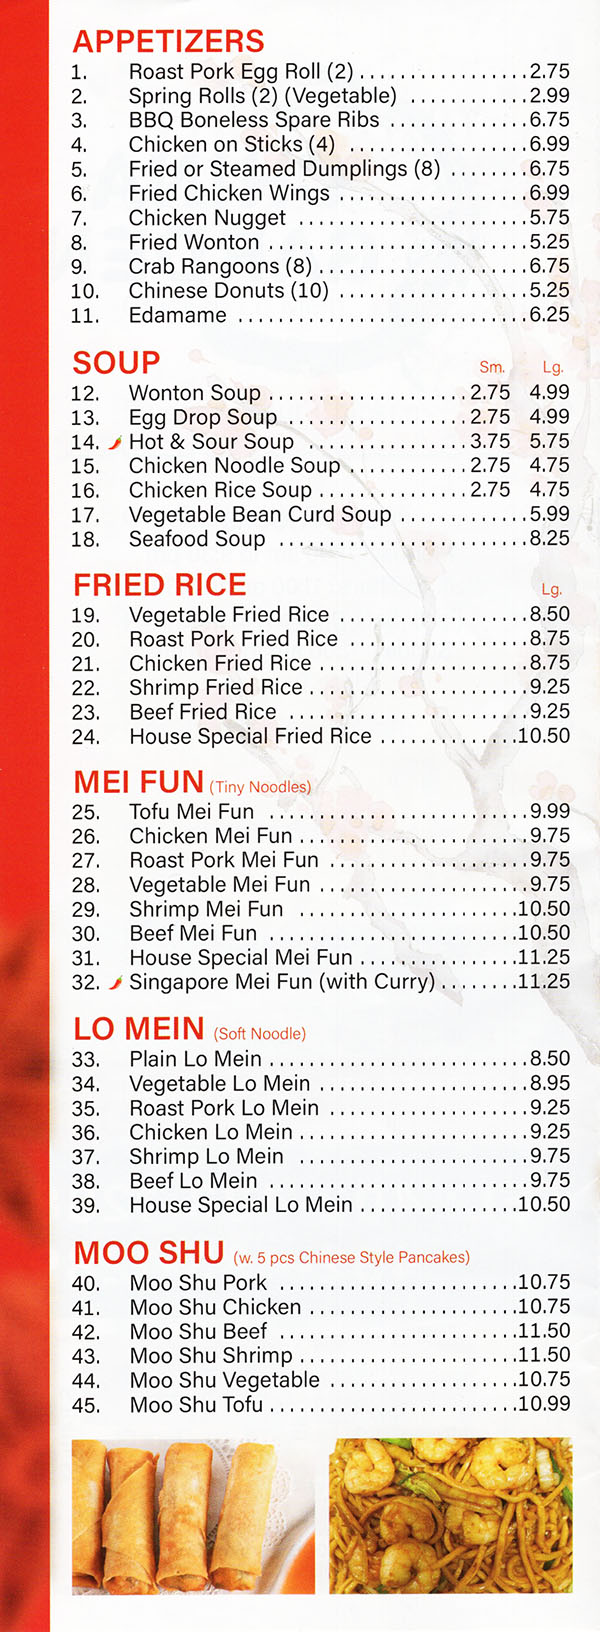 China Garden Chinese Restaurant Menu Page 2
APPETIZERS
1. Roast Pork Egg Roll (1) $1.25
2. Spring Roll (2) (Vegetable) $2.25
3. BBQ Boneless Spare Ribs $6.00
4. Chicken on Stick $5.50
5. Fried or Steamed Dumpling (8) $4.99
6. Fried Chicken Wings $4.75
7. Chicken Nugget $5.50
8. Fried Wonton $3.99
9. Crab Ran goons (8) $4.99
10. Fried Sugar Donut (10) $3.99
SOUP
11. Wonton Soup $1.75 / $3.25
12. Egg Drop Soup $1.75 / $3.25
13. Hot & Sour Soup $2.25 / $3.99
14. Chicken Noodle Soup $1.75 / $3.25
15. Chicken Rice Soup $1.75 / $3.25
16. Vegetable Bean Curd Soup $3.99
17. Seafood Soup $5.75
FRIED RICE 
18. Vegetable Fried Rice $6.50
19. Roast Pork Fried Rice $6.99
20. Chicken Fried Rice $6.99
21. Beef Fried Rice $7.50
22. Shrimp Fried Rice $7.50
23. House Special Fried Rice $8.25
CHOW MEW OR CHOP SUEY
(with Crispy Noodles) (with White Rice)
24. Chicken Chow Me in or Chop Suey $6.99
25. Roast Pork Chow Me in or Chop Suey $6.99
26. Vegetable Chow Mein or Chop Suey $6.50
27. Shrimp Chow Mein or Chop Suey $7.50
28. Beef Chow Mein or Chop Suey $7.50
LO MEIN
(Soft Noodle) 
29. Vegetable Lo Mein $6.99
30. Roast Pork Lo Mein $7.25
31. Chicken Lo Mein $7.25
32. Beef Lo Mein $7.75
33. Shrimp Lo Mein $7.75
34. House Special Lo Mein $8.50
MOO SHU
(with 4 pcs Chinese Style Pancakes)
35. Moo Shu Pork $7.99
36. Moo Shu Chicken $7.99
37. Moo Shu Beef $8.50
38. Moo Shu Shrimp $8.50
39. Moo Shu Vegetable $7.50
EGG FOO YOUNG
(with White Rice)
40. Roast Pork Egg Foo Young $7.50
41. Chicken Egg Foo Young $7.50
42. Beef Egg Foo Young $8.25
43. Shrimp Egg Foo Young $8.25
44. House Special Egg Foo Young $8.50
Menu Provided By: Metro Dining Delivery www.MetroDiningDelivery.com 402-474-7335